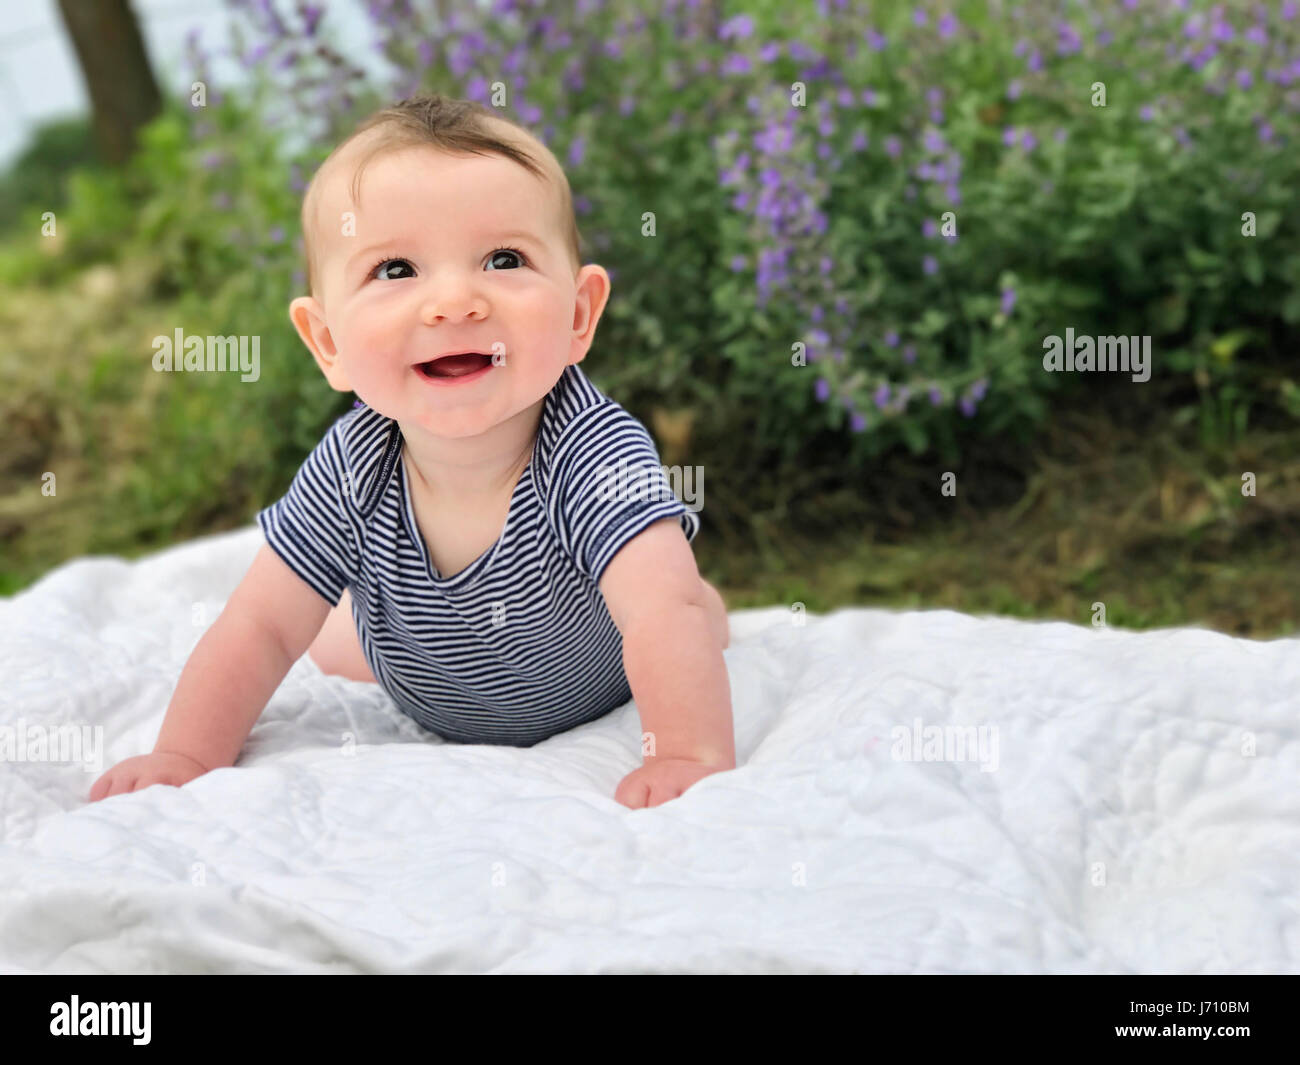 Cute happy baby boy laying on blanket looking up Banque D'Images